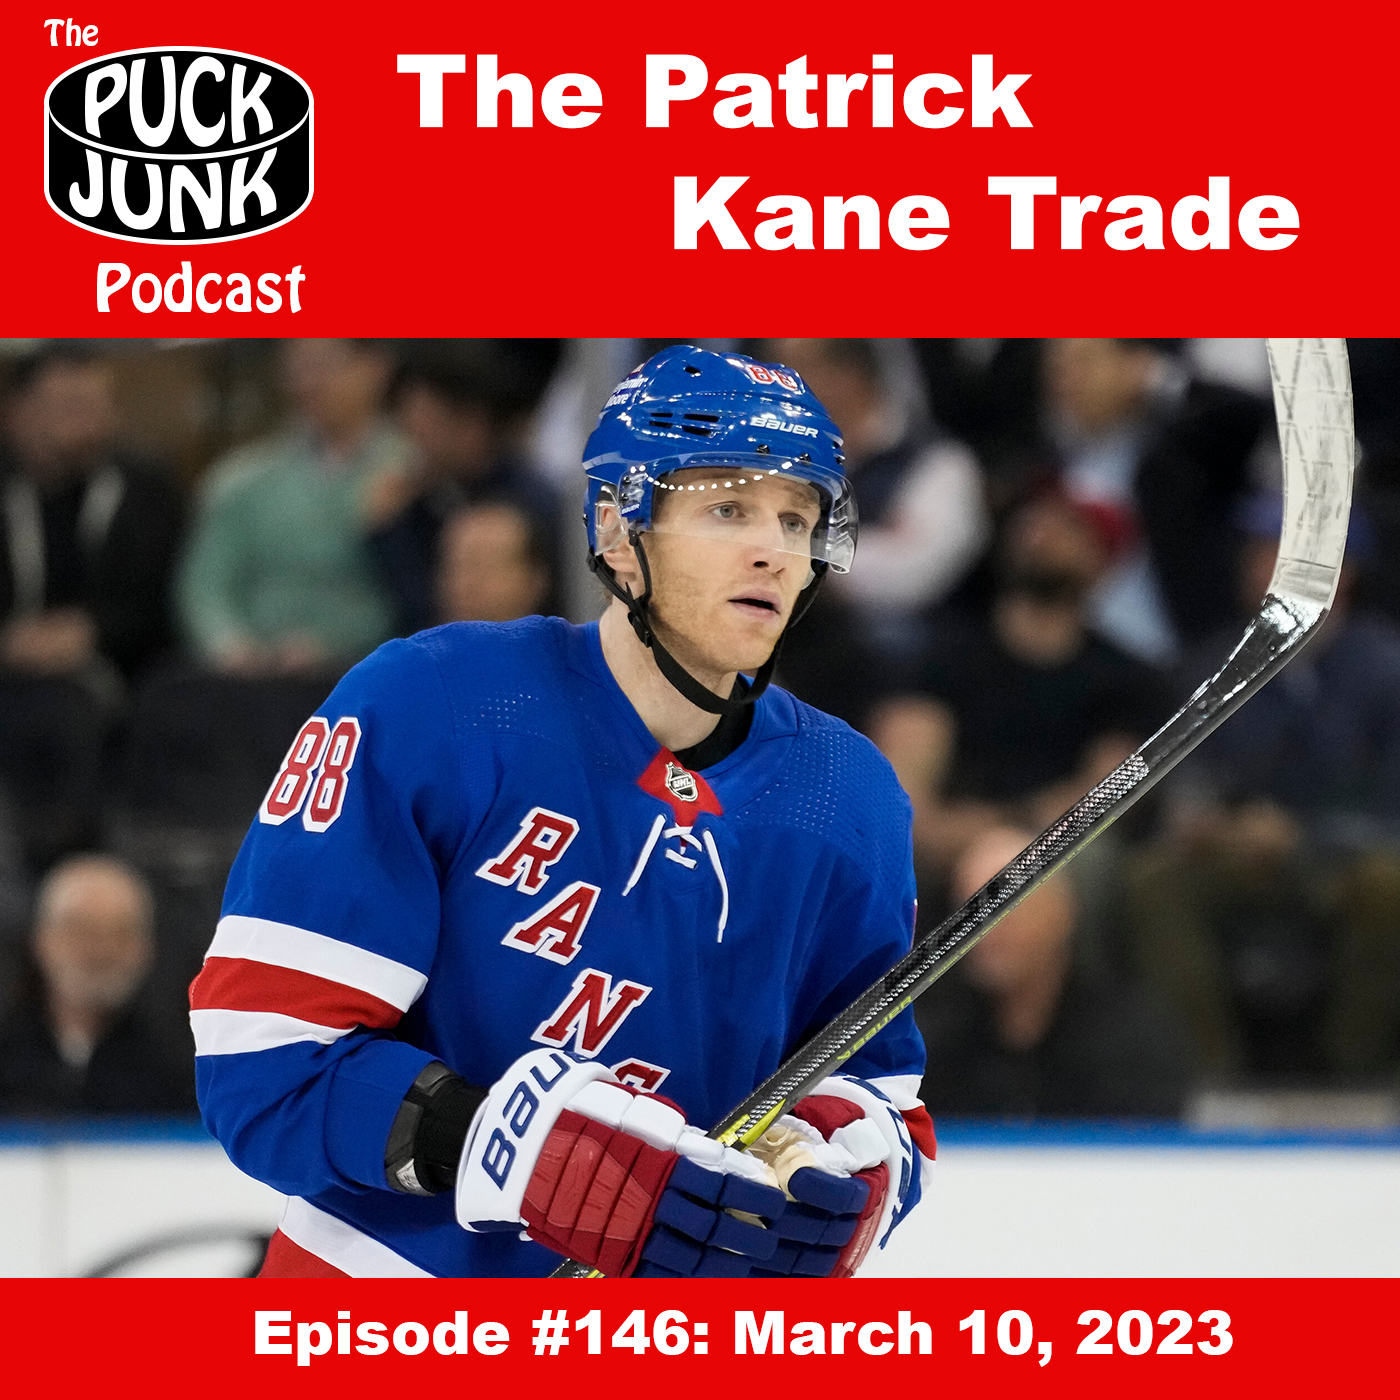 NHL trade deadline: How Patrick Kane Rangers trade affects Stanley